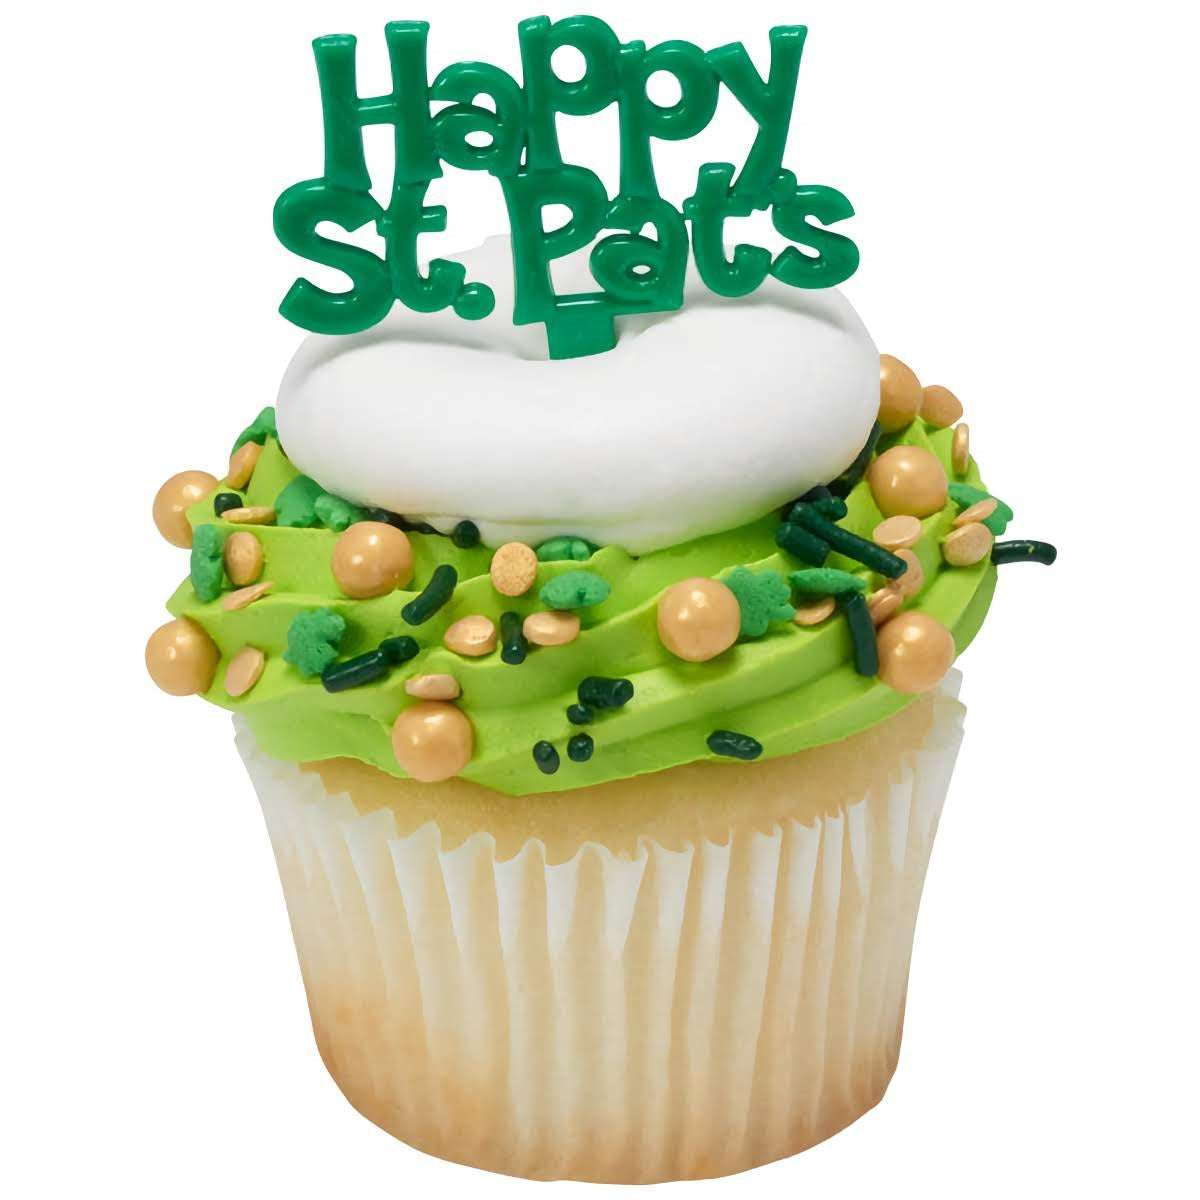 Cheerful 'Happy St. Pats' message cupcake pics, crafted in bright green to bring a joyful message to your St. Patrick's Day dessert table, perfect for adding a personalized touch to cupcakes and celebratory treats.